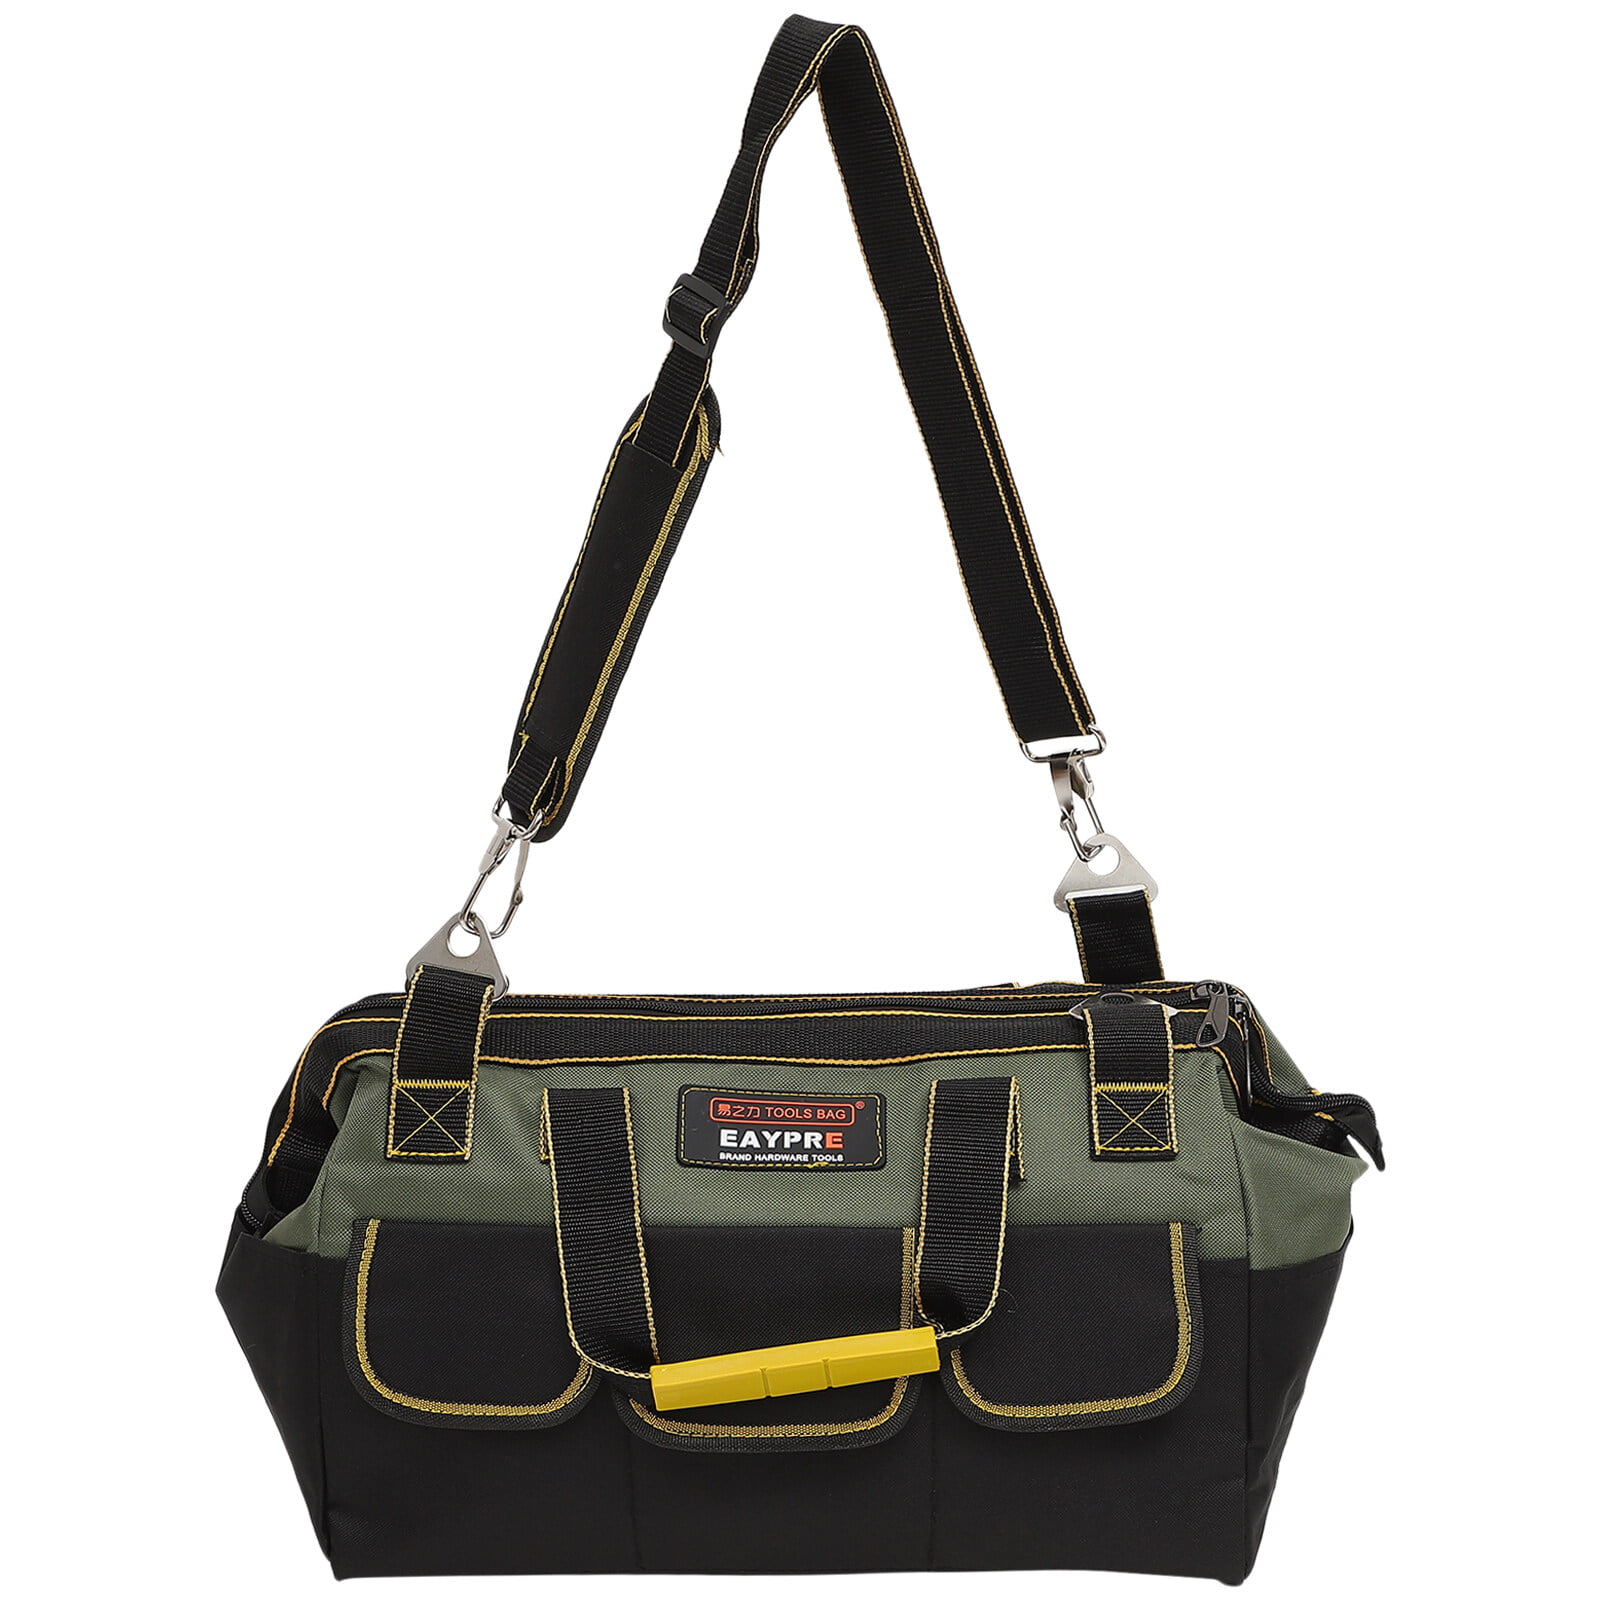 Small Tool Bag | Detailing Tote Bag - 1680D Oxford Fabric | Detailers Essential Bag with Belt & Handle